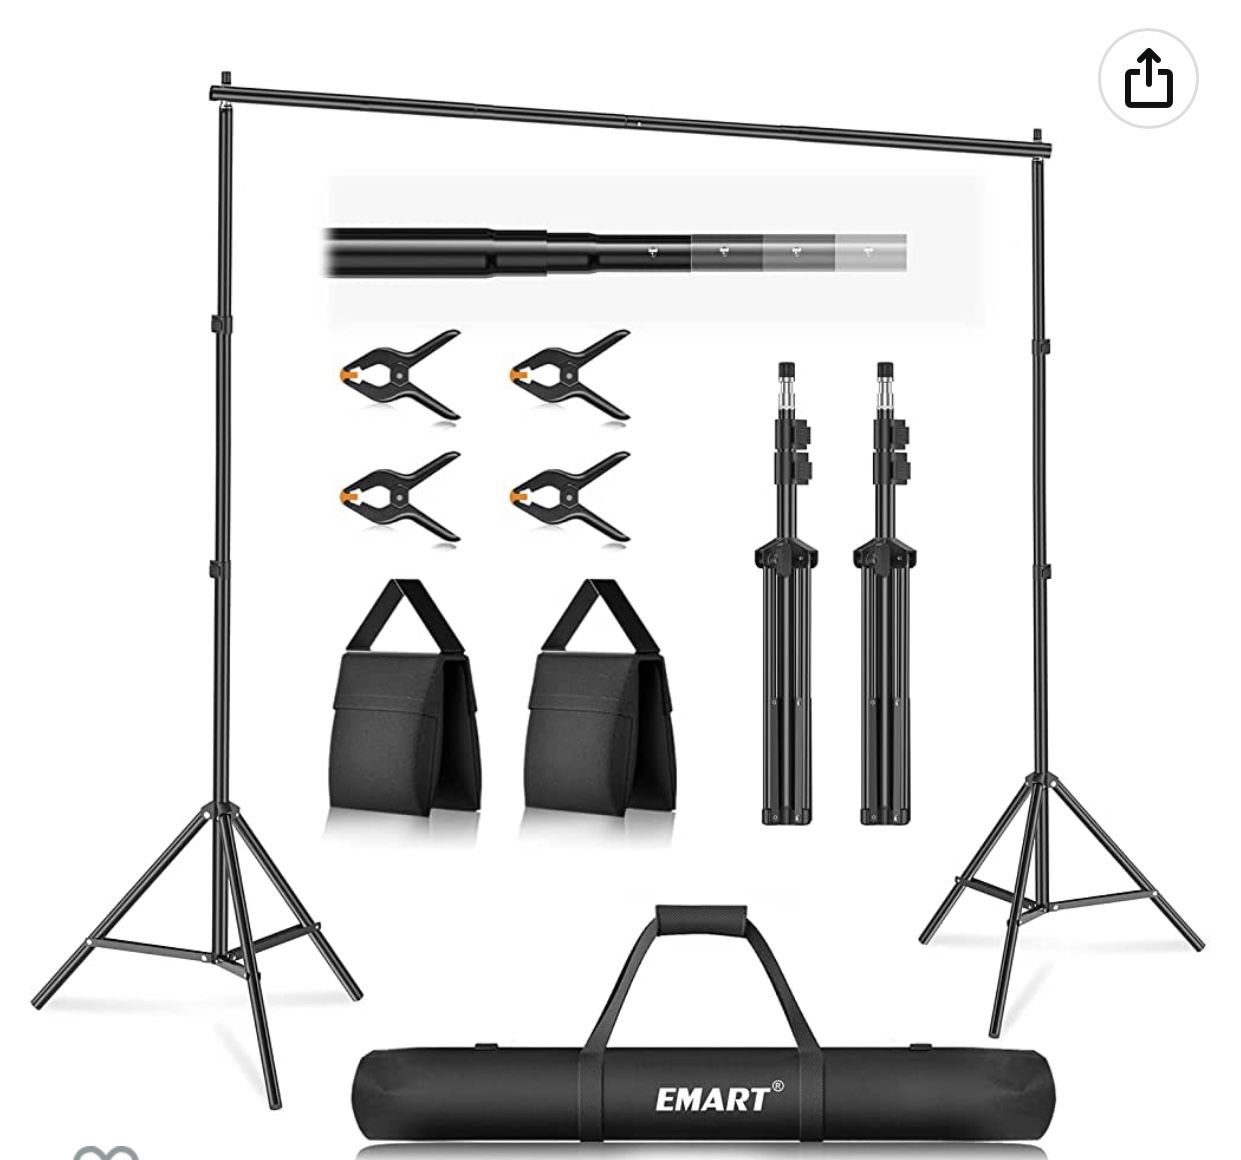 Backdrop Stand & Curtains